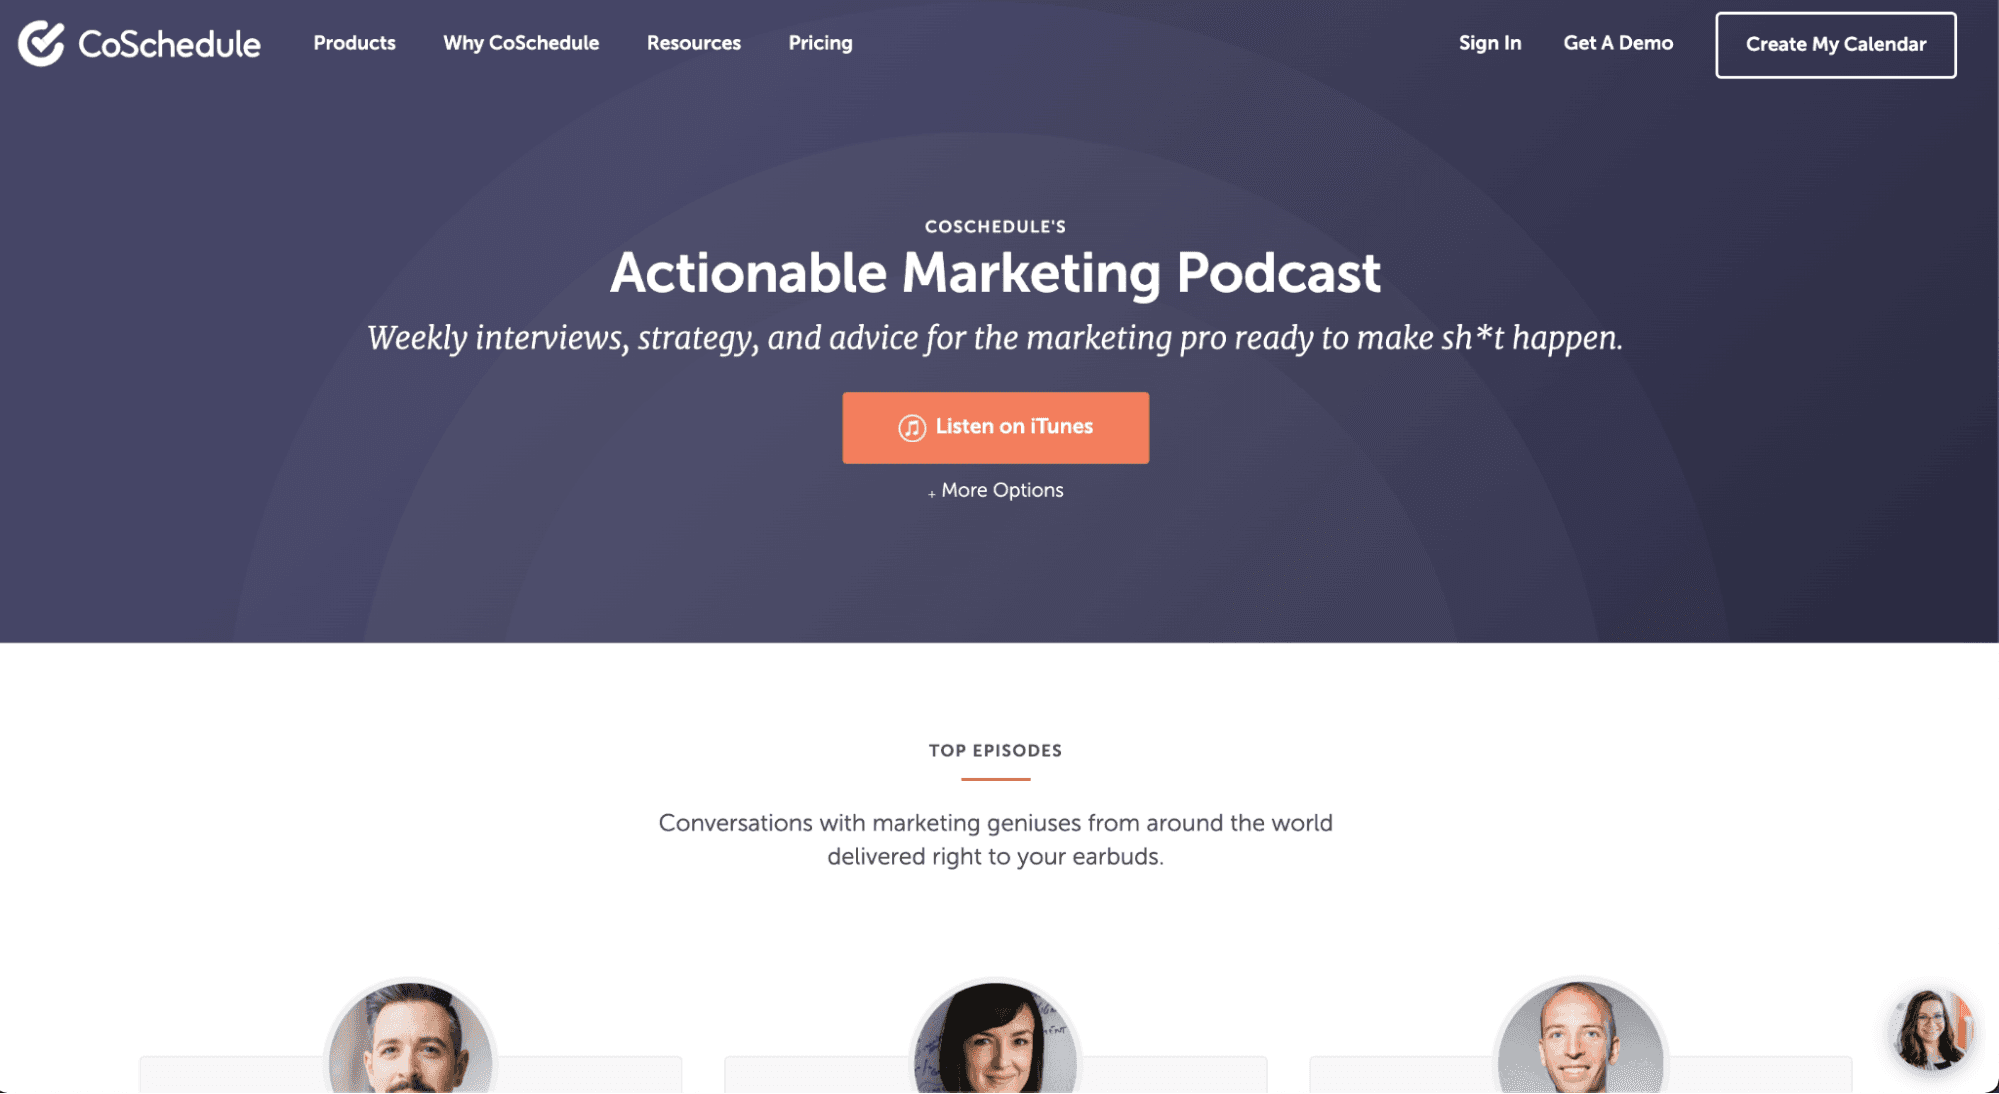 Screenshot of the Actionable Marketing Podcast on the CoSchedule website